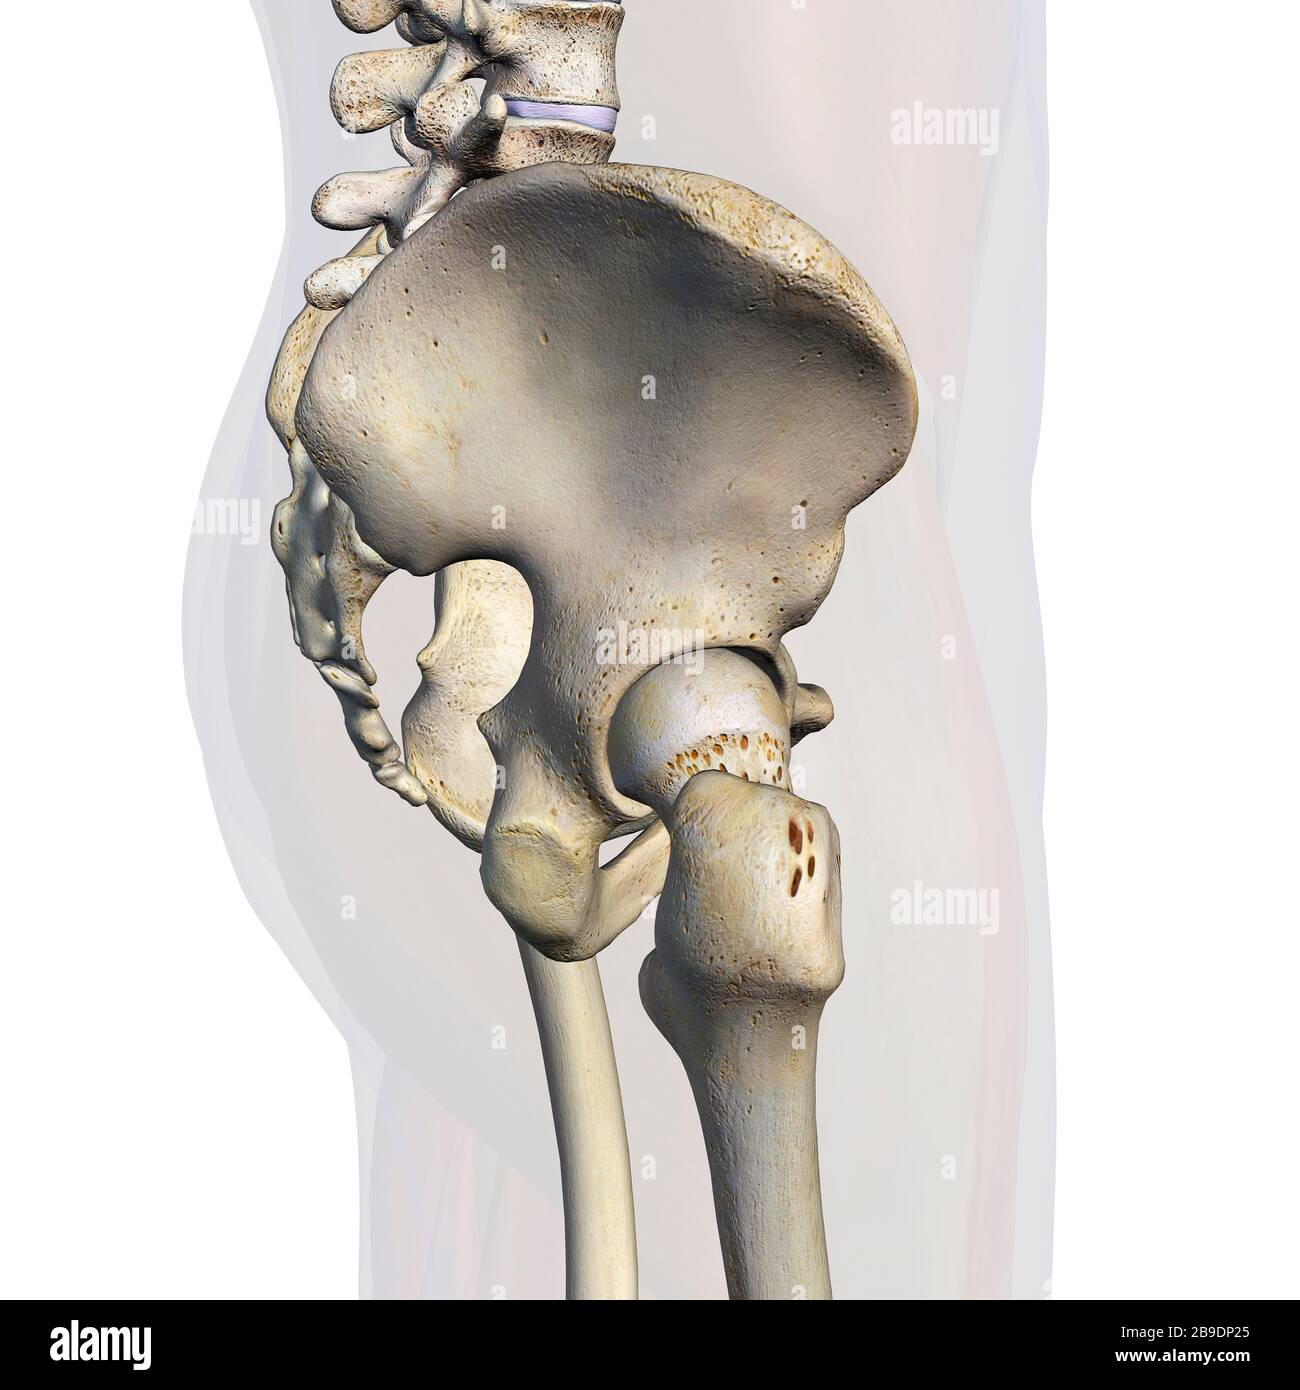 Lateral view of male pelvis, hip, and leg bones on a white background. Stock Photo